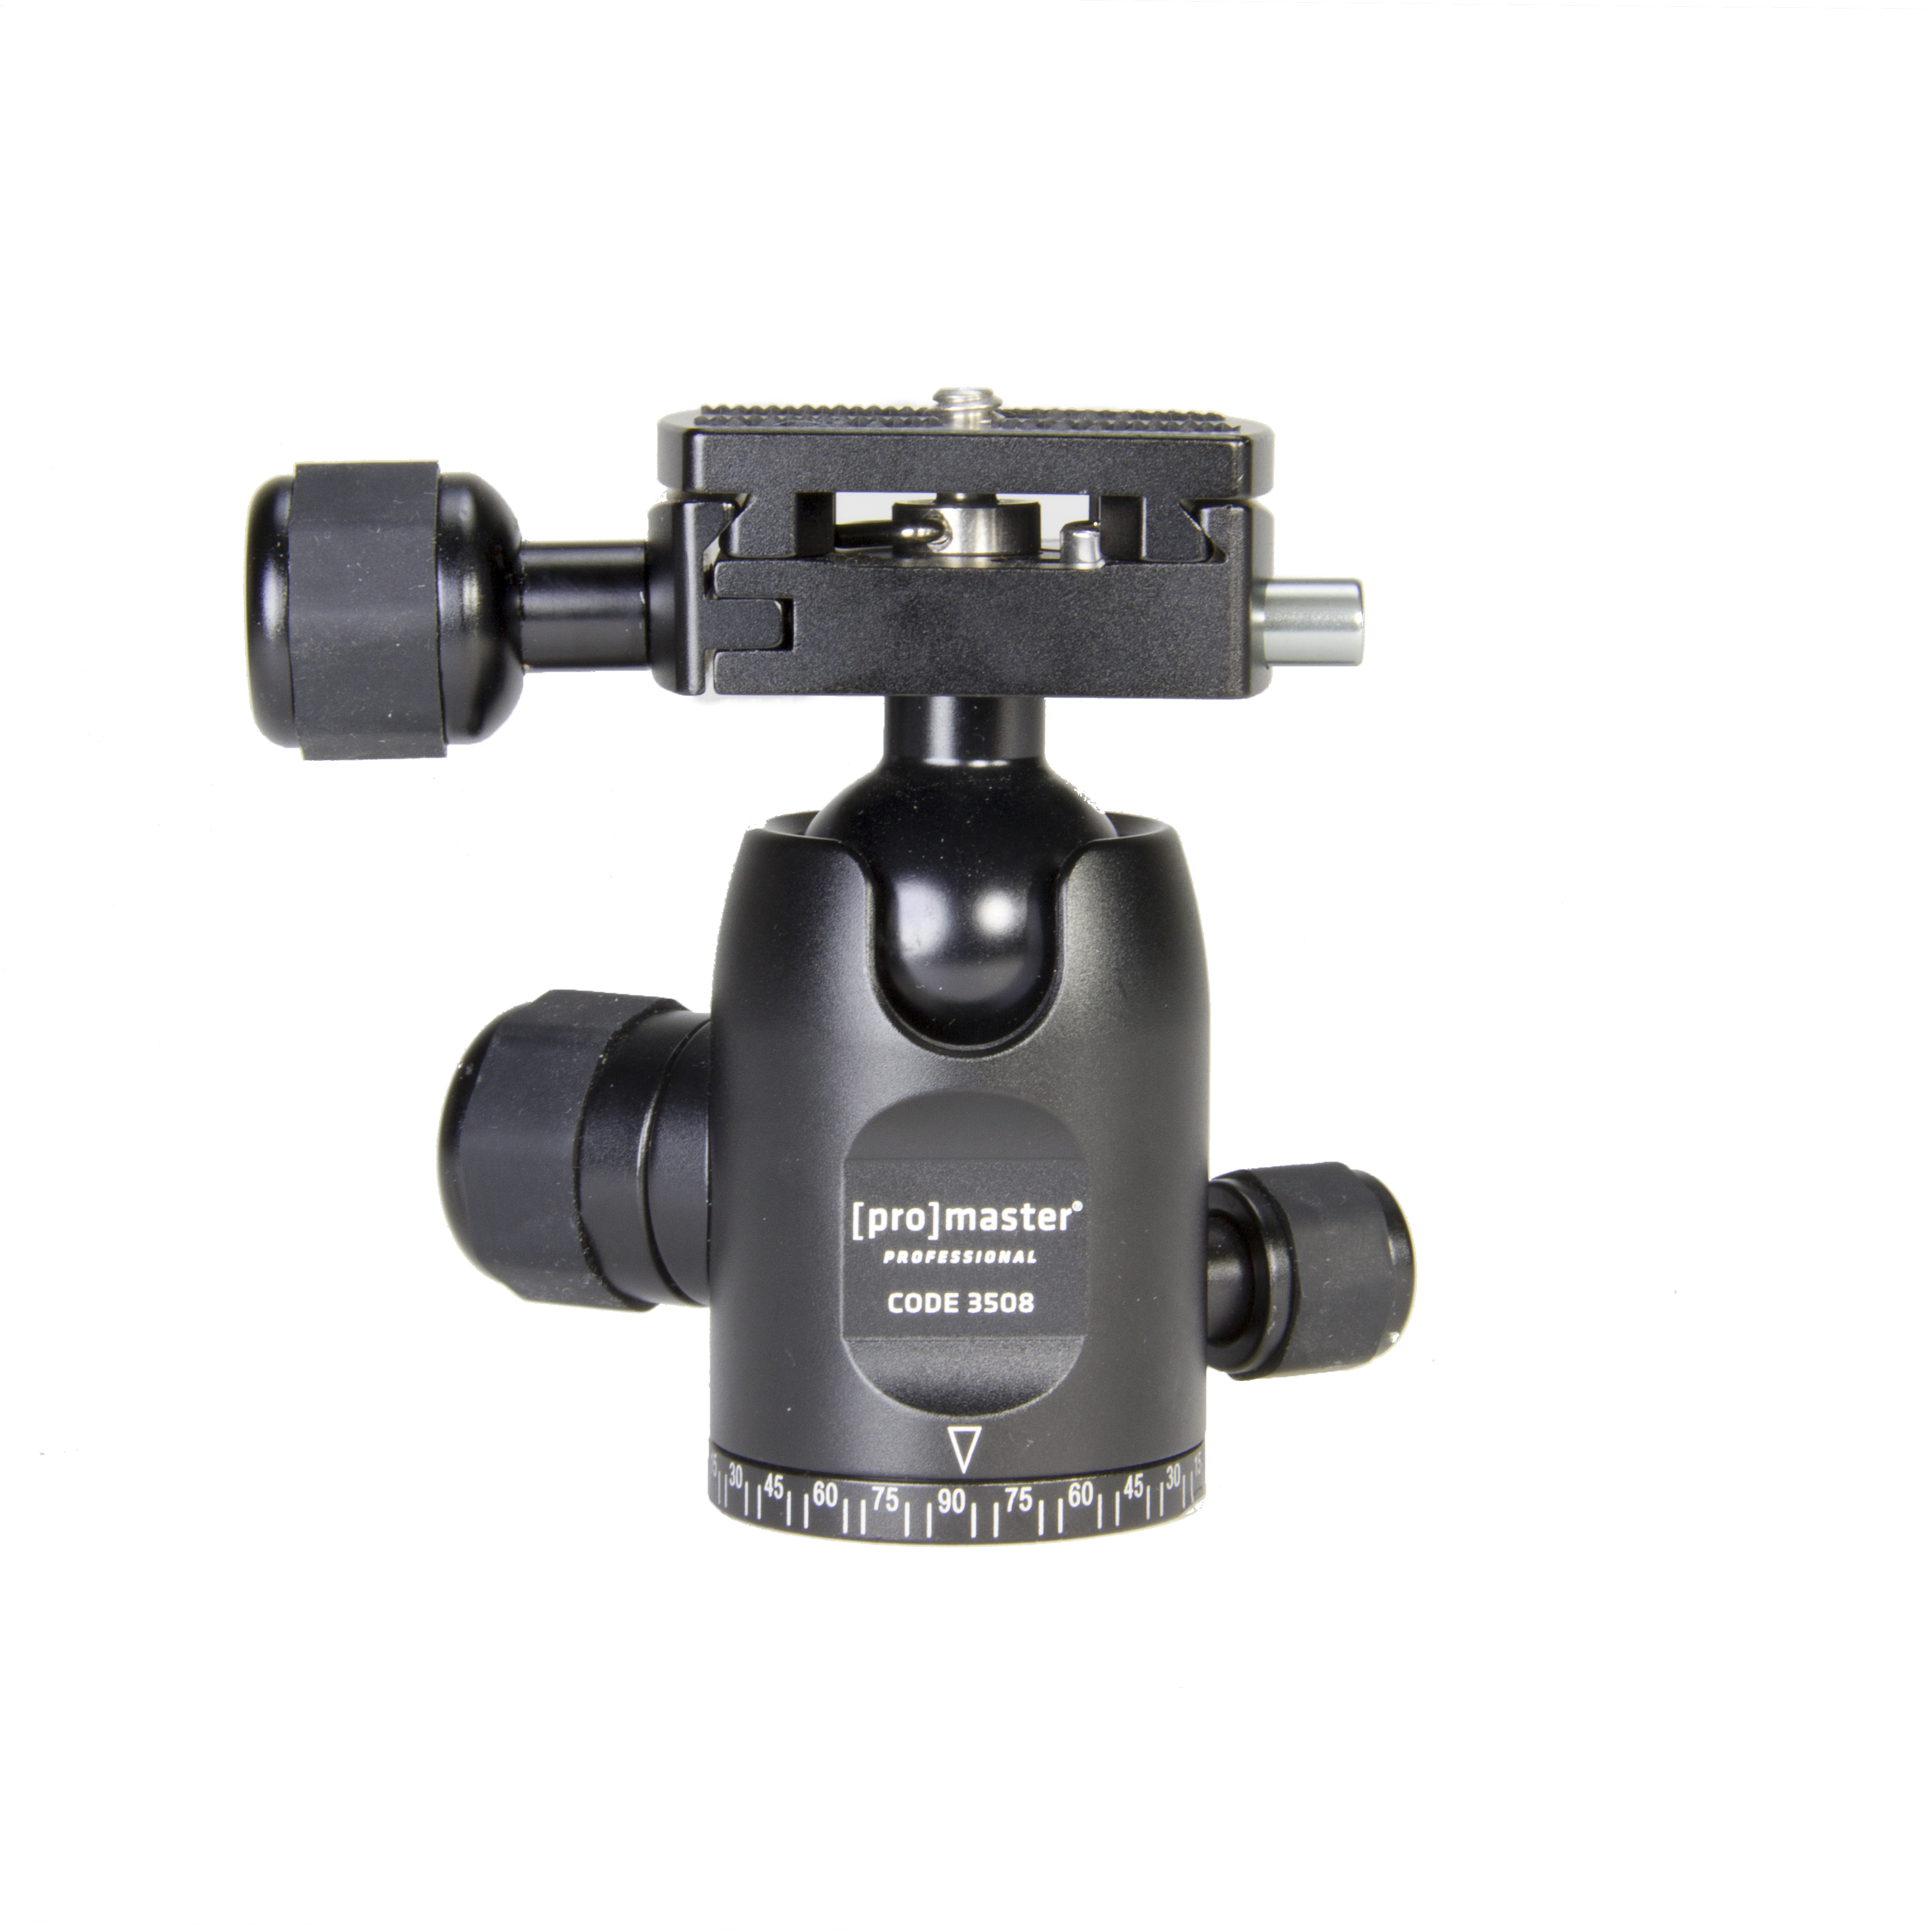 Promaster 3508 BS-08 Professional Ball  Head